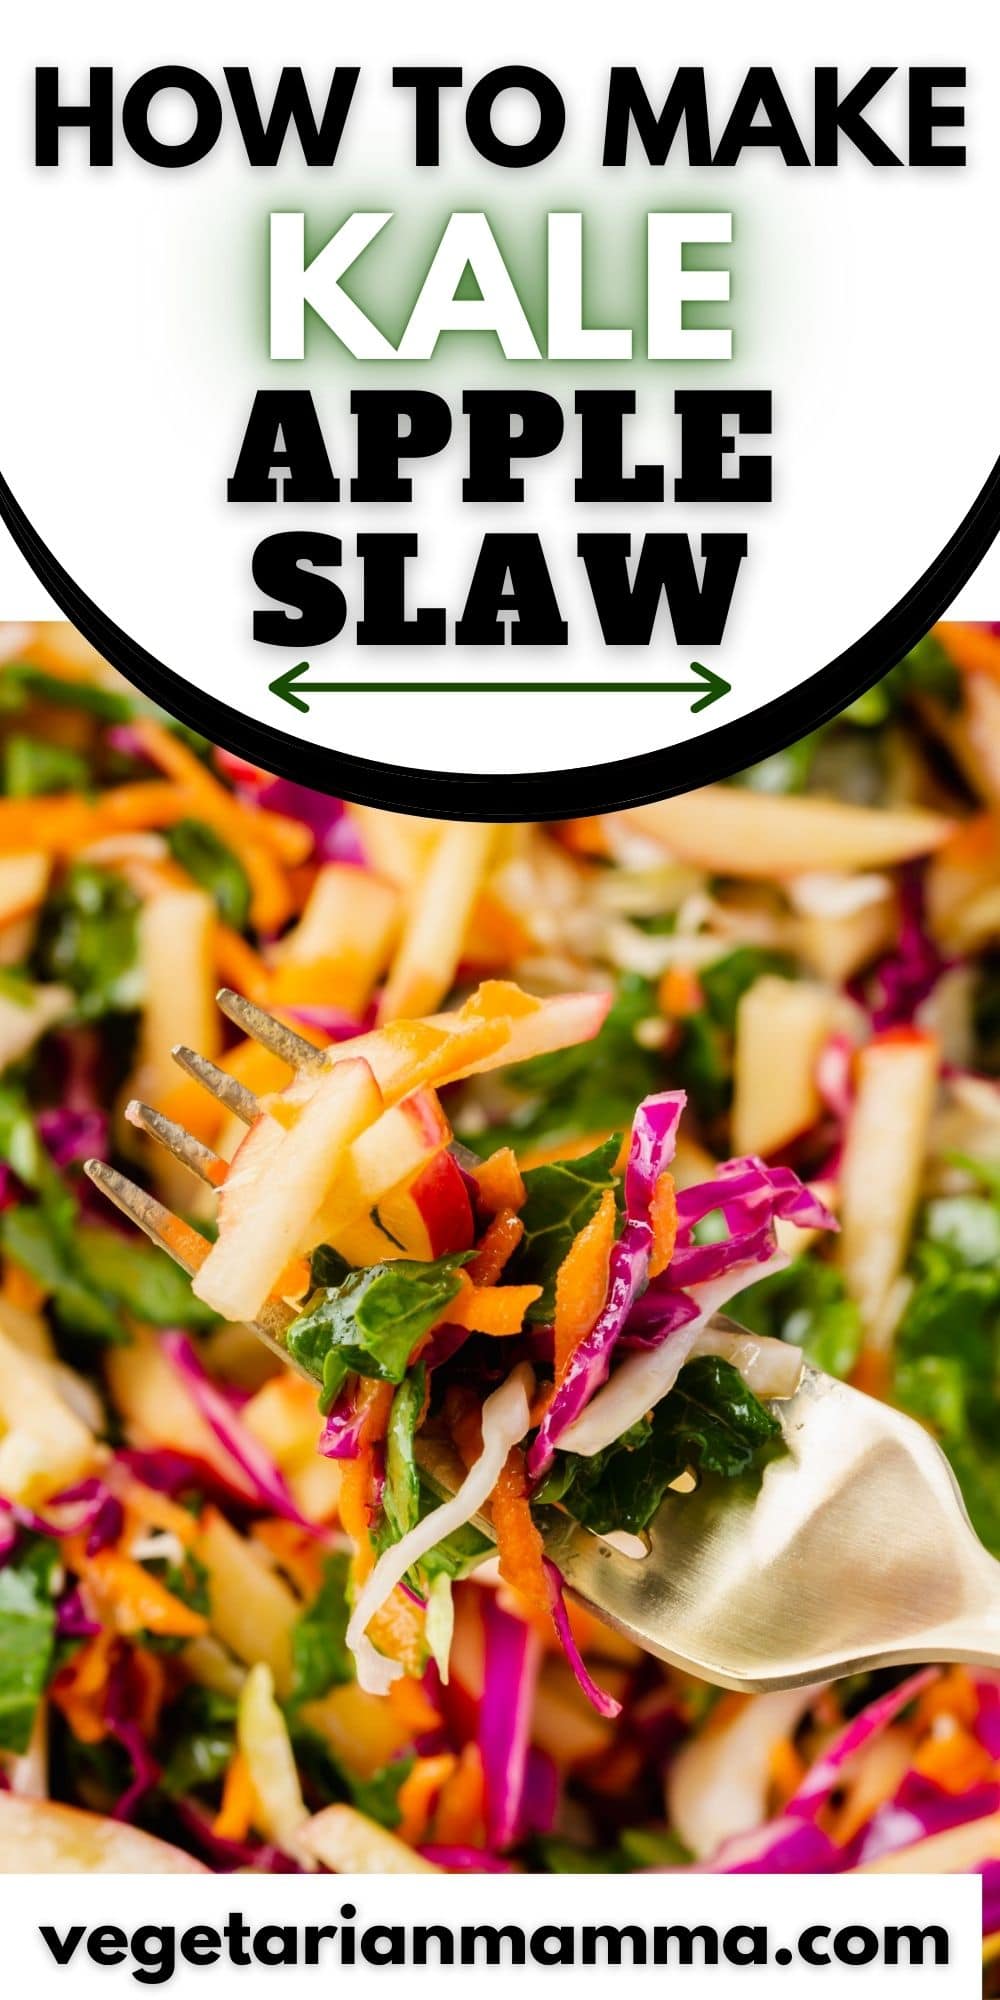 Kale Apple Slaw is a healthy, crunchy and flavorful side dish with the most delicious homemade dressing. It's easy to make and everyone loves it!